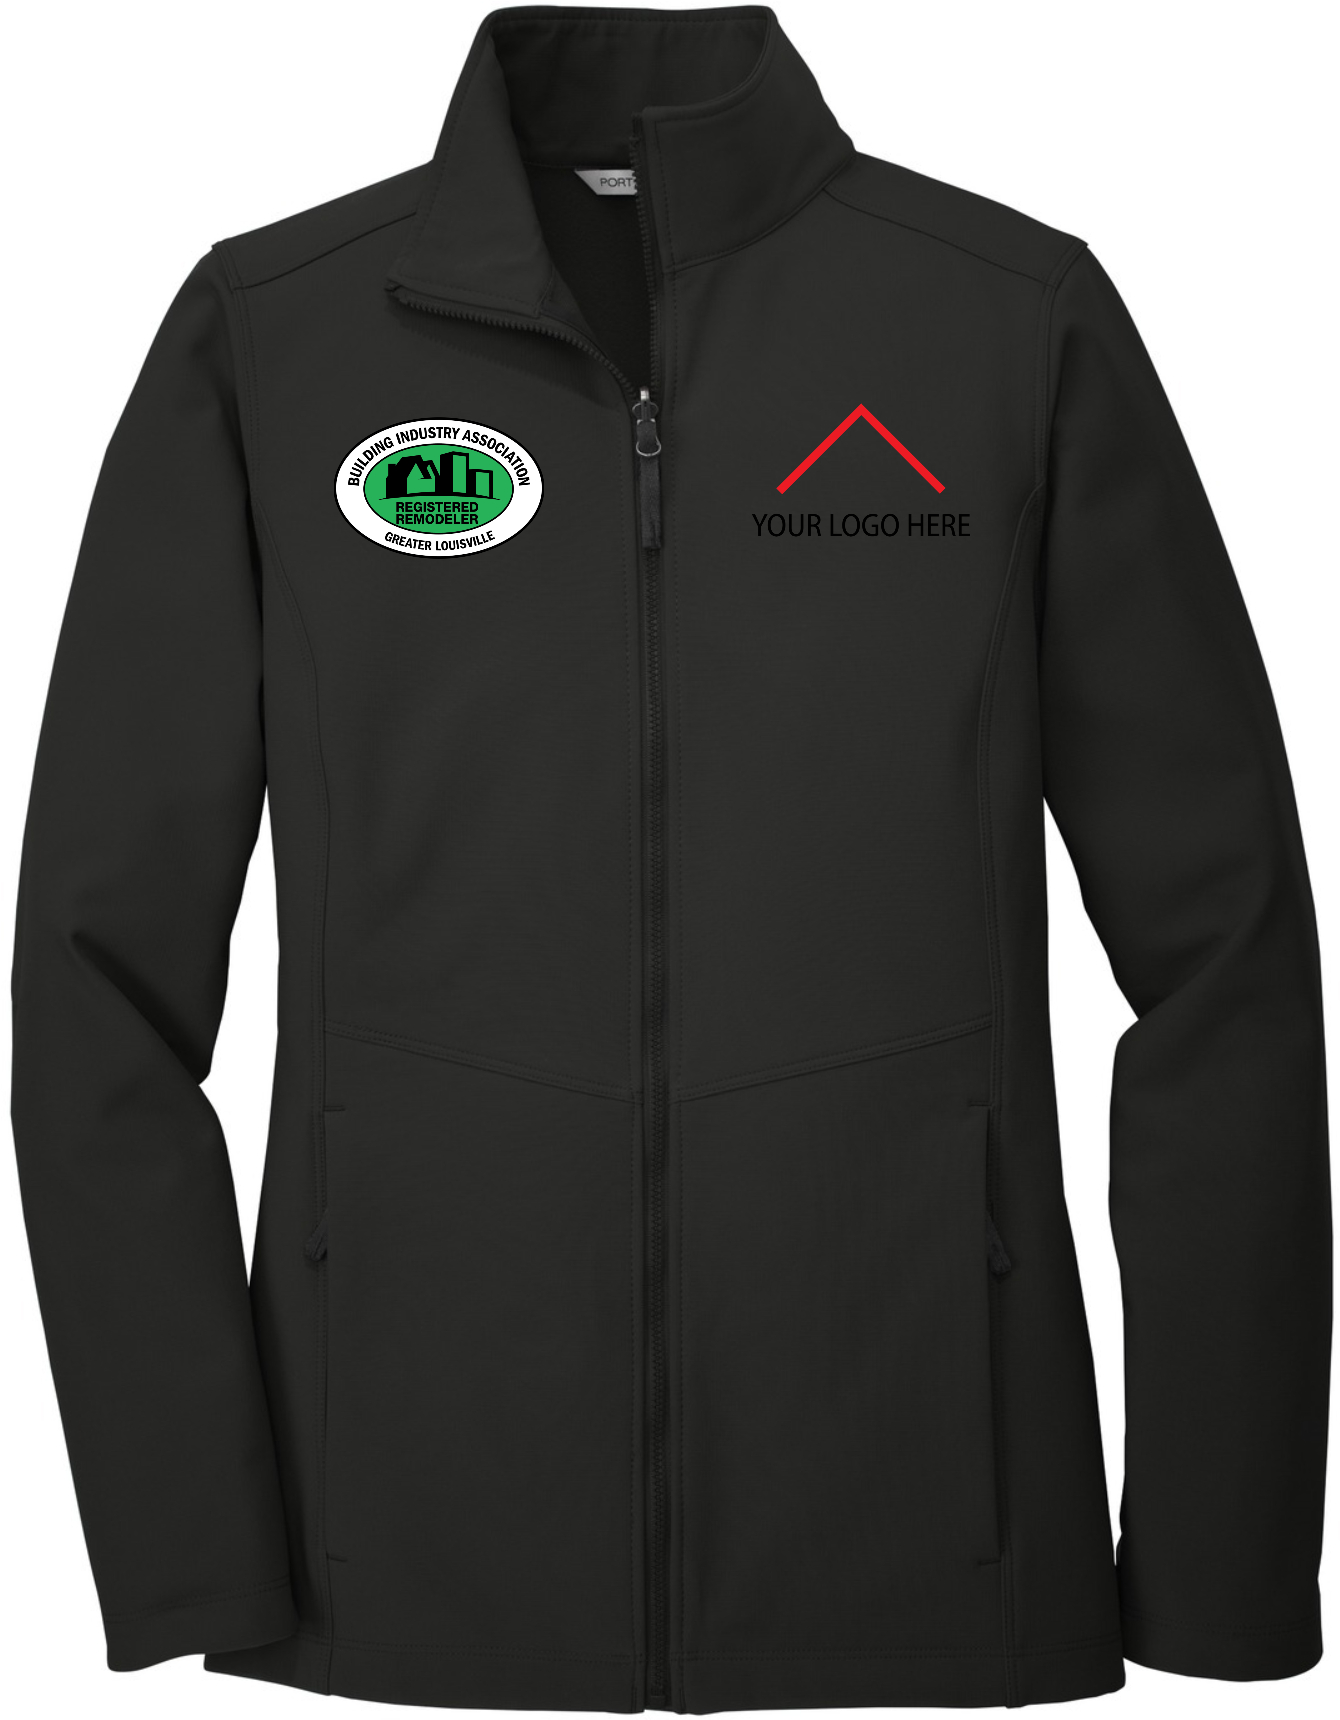 Registered Remodeler - Registered Remodeler - Port Authority ® Ladies Collective Soft Shell Jacket - L901 (Add Your Own)